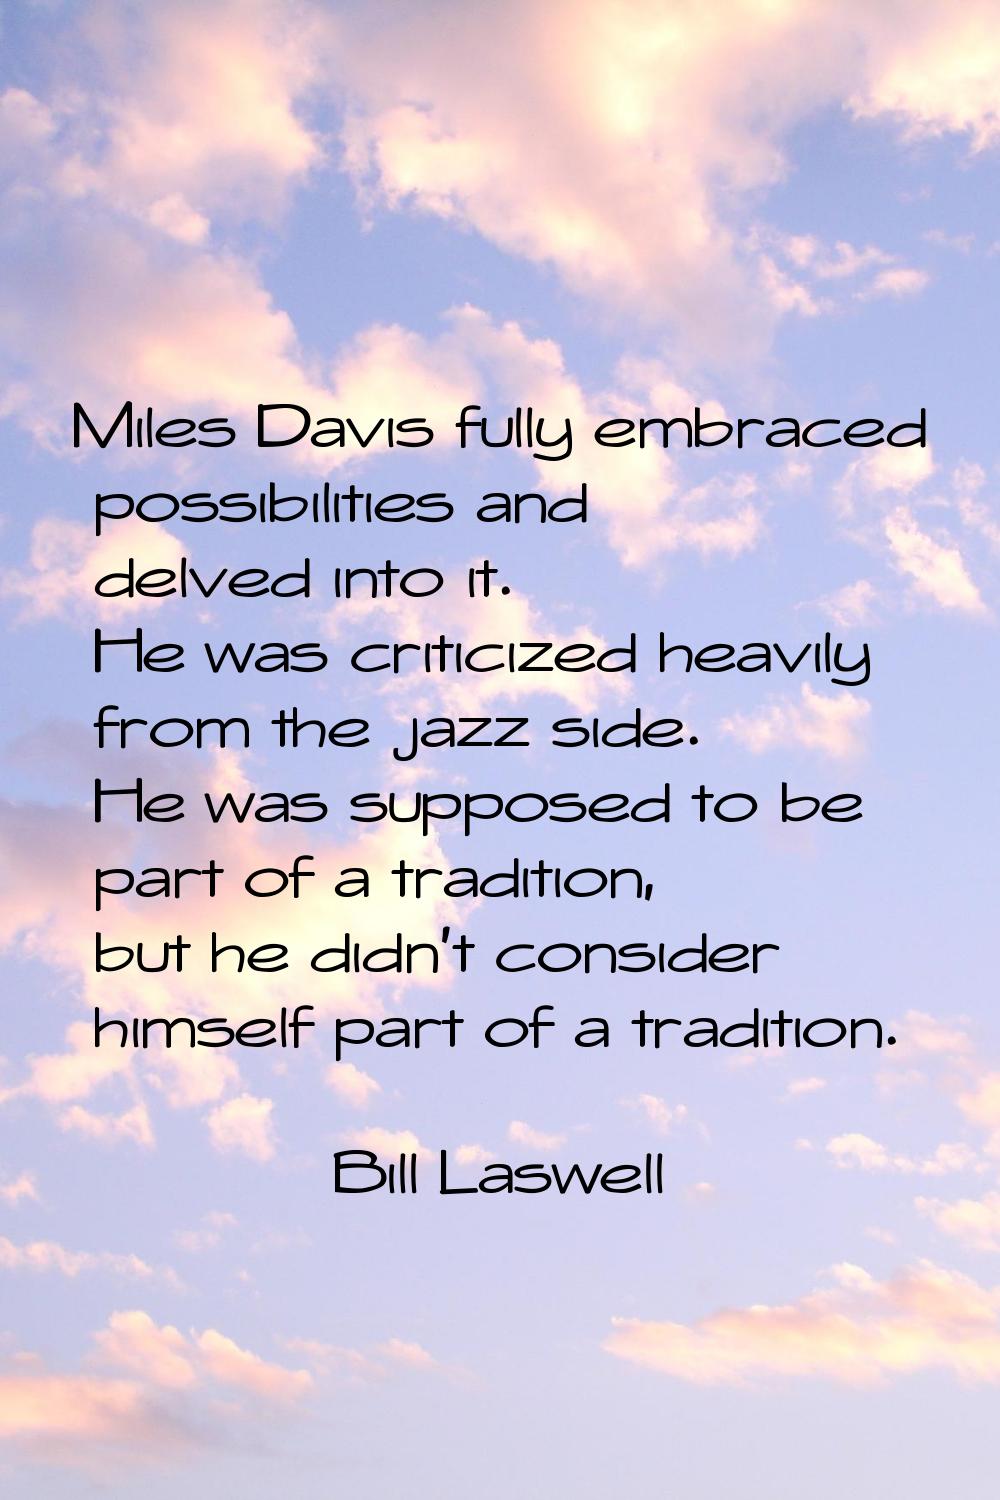 Miles Davis fully embraced possibilities and delved into it. He was criticized heavily from the jaz